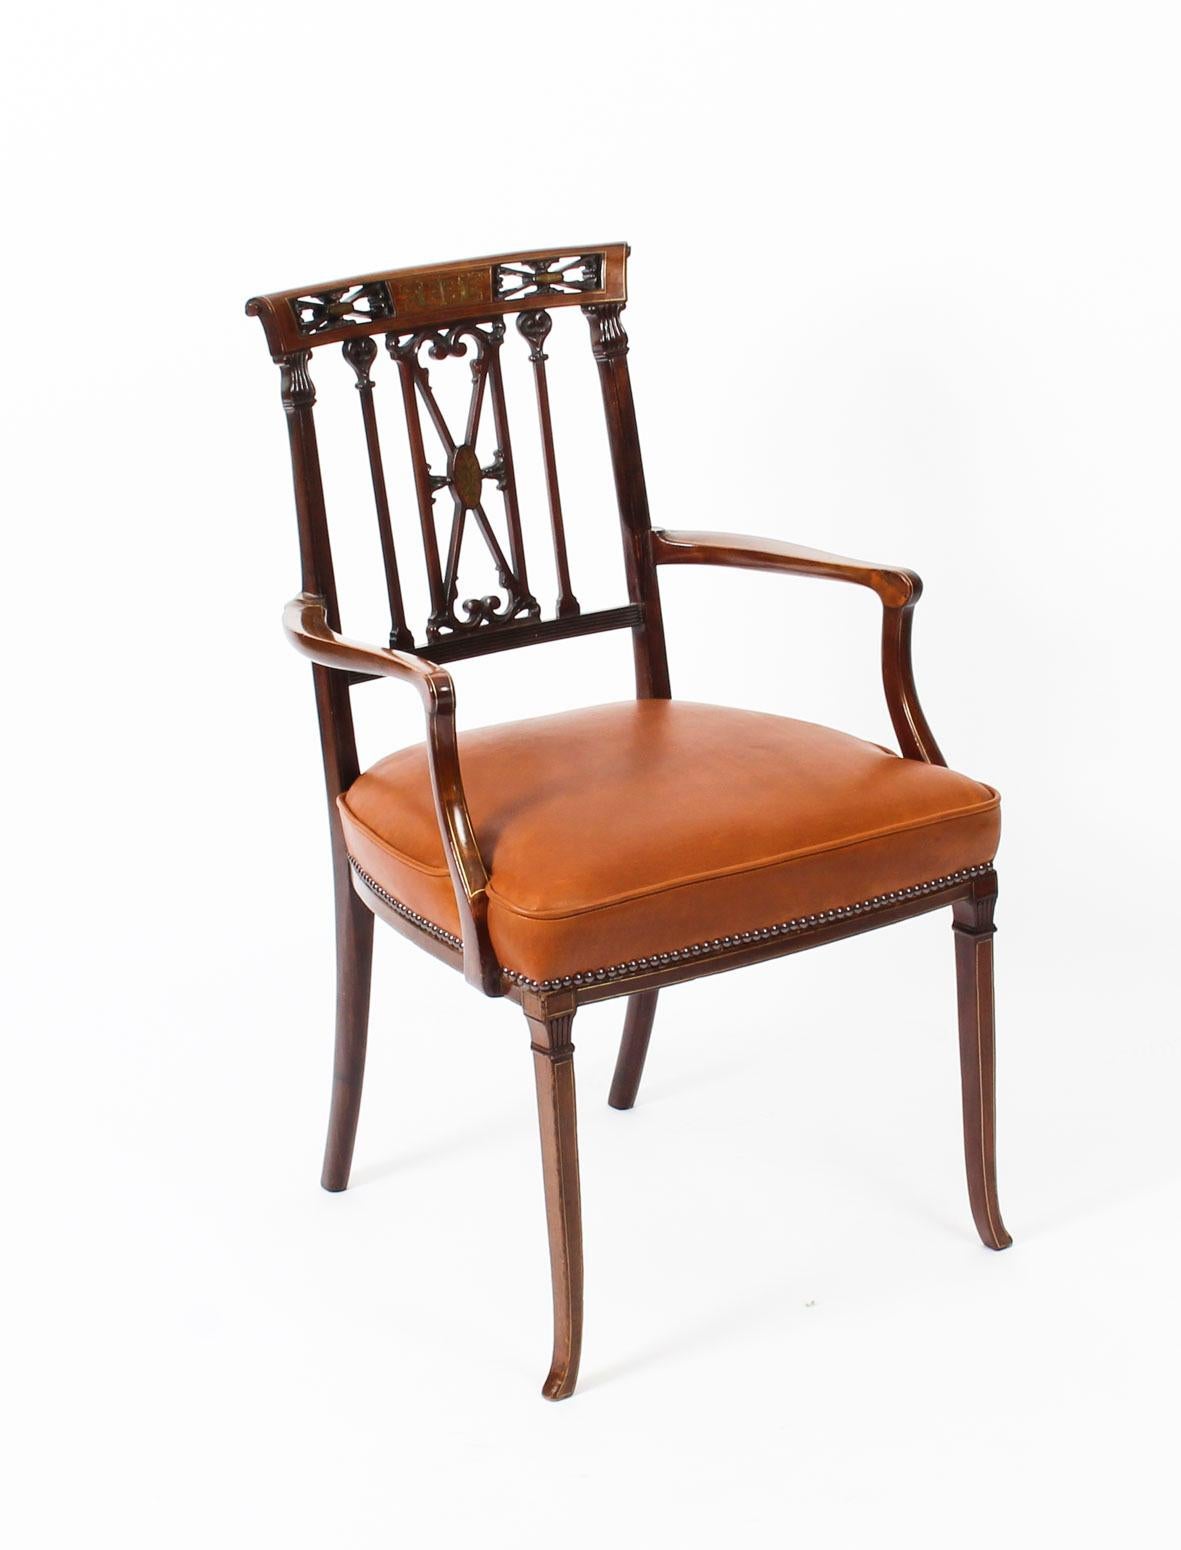 Antique Victorian Mahogany and Brass Inlaid Armchair, 19th Century 7